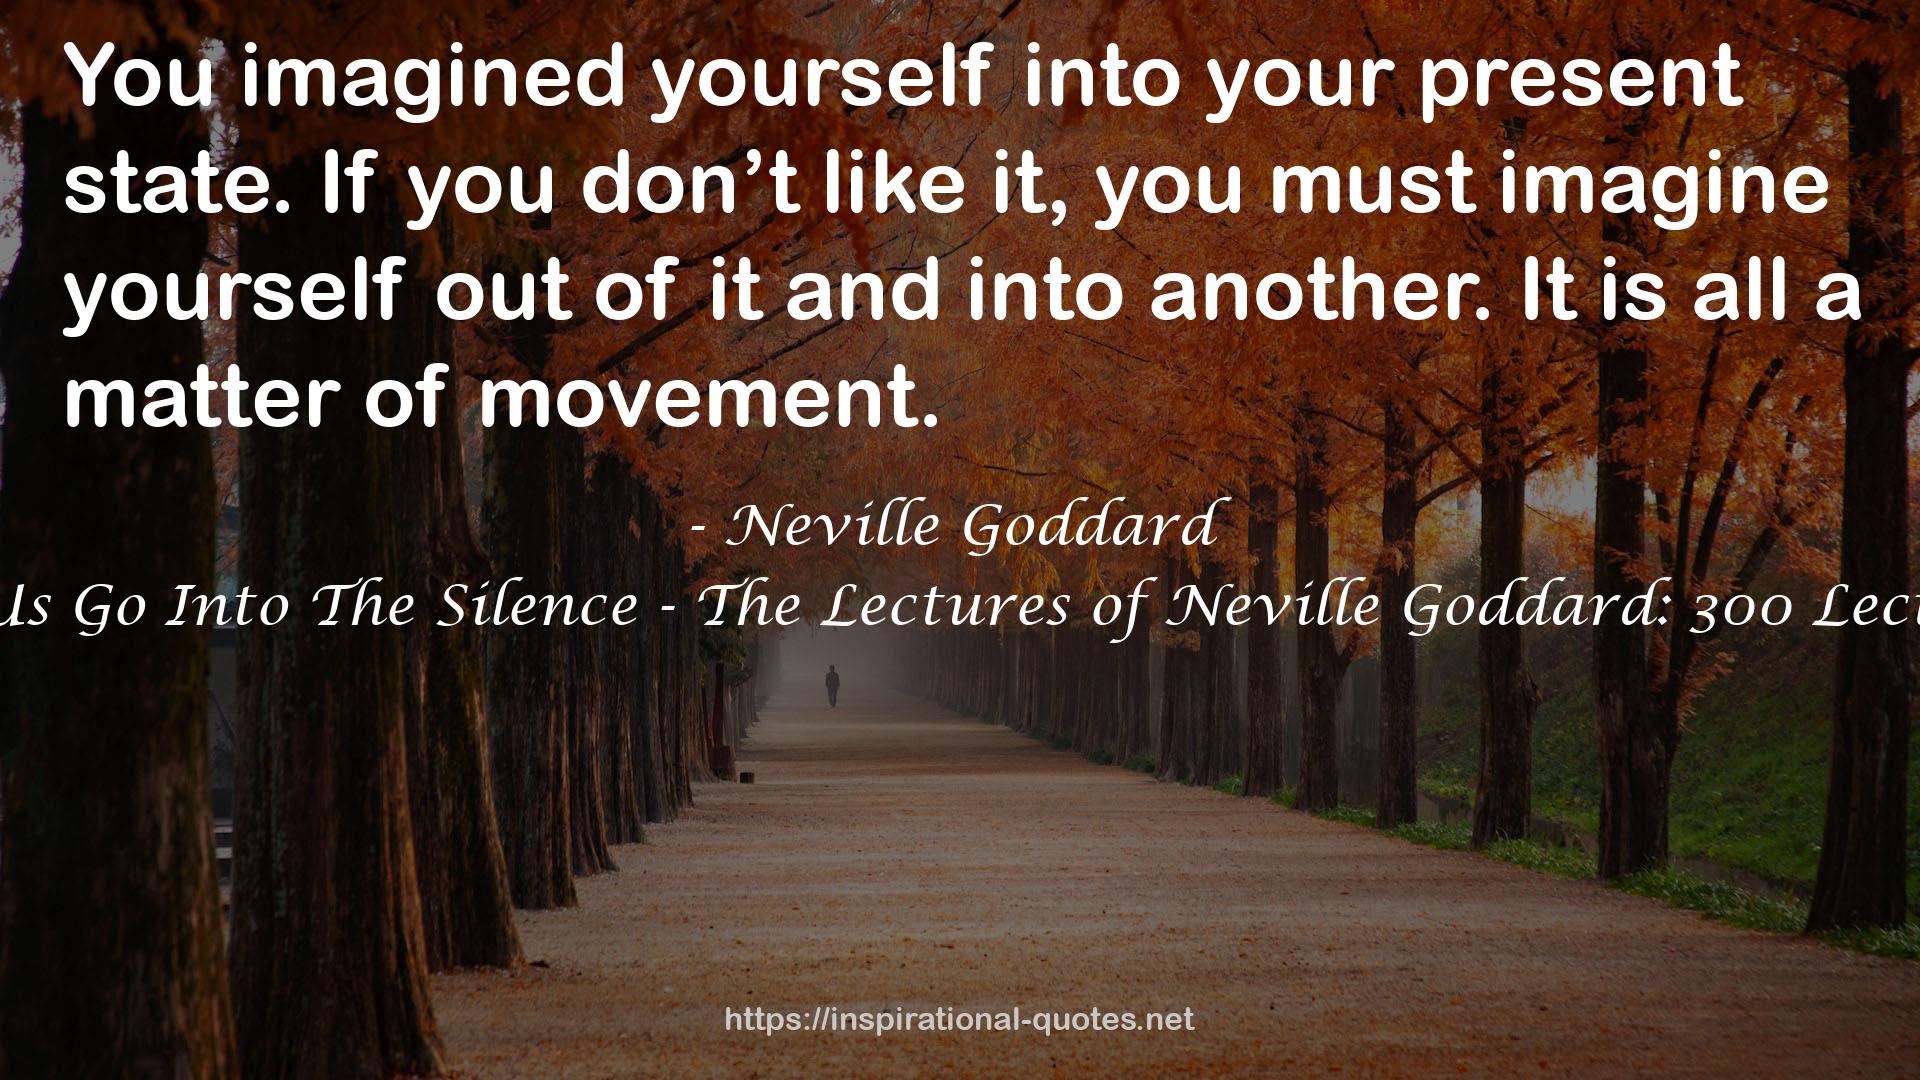 Let Us Go Into The Silence - The Lectures of Neville Goddard: 300 Lectures QUOTES